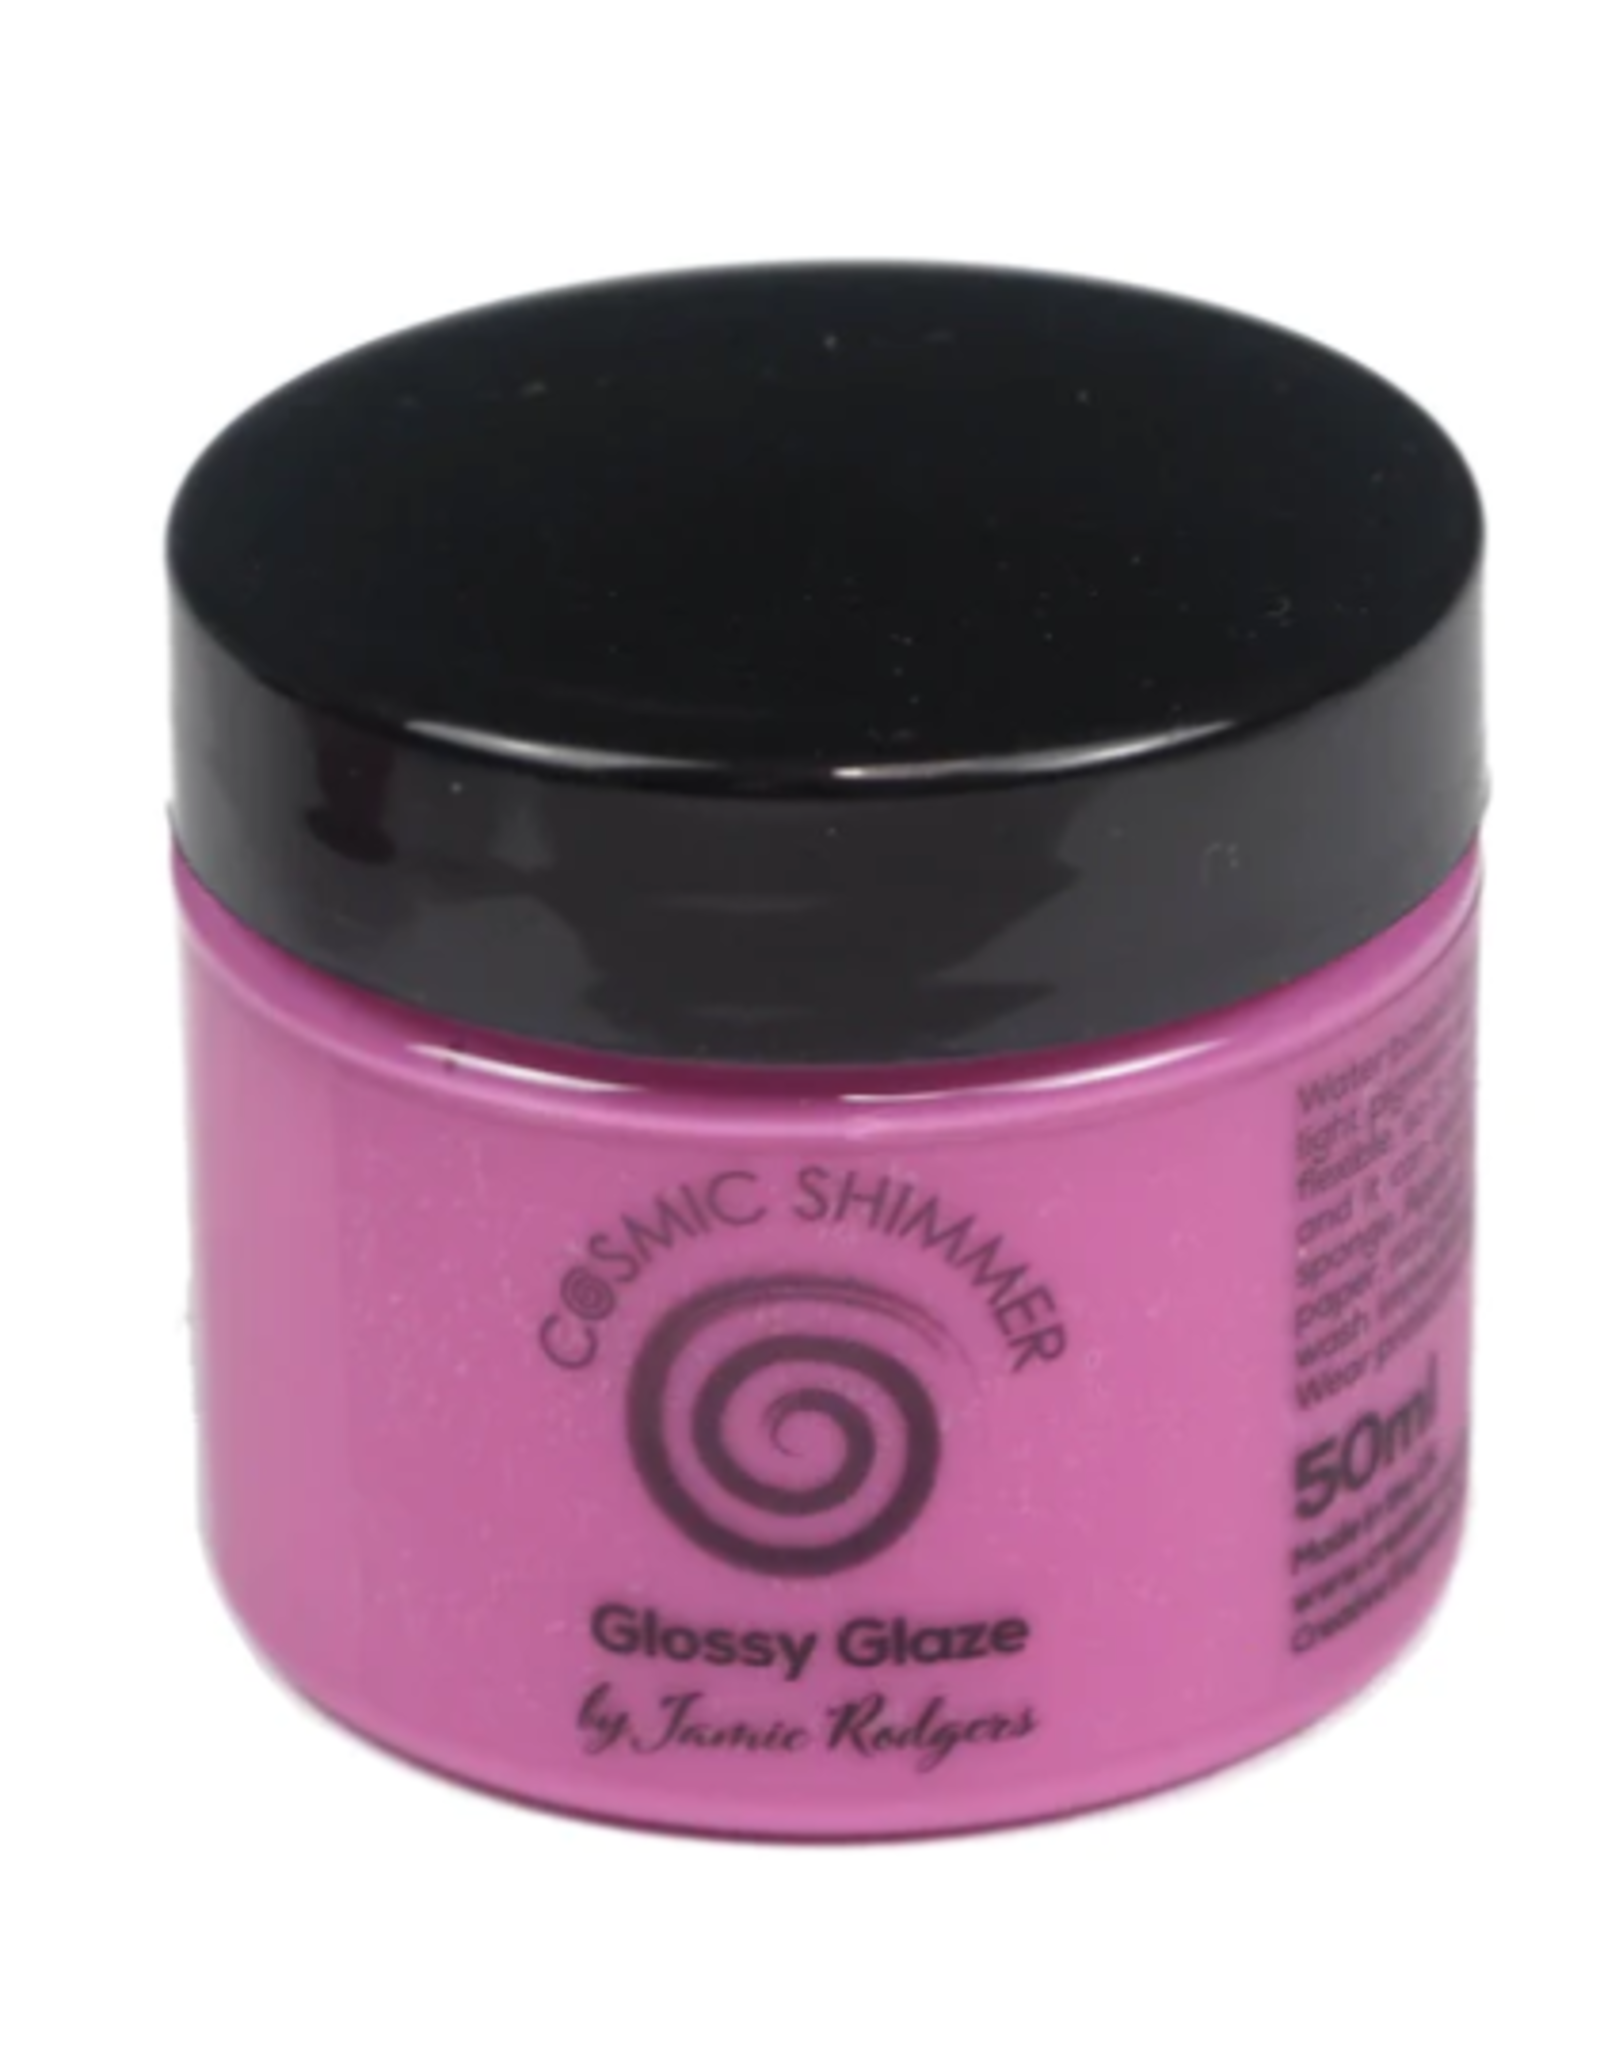 CREATIVE EXPRESSIONS CREATIVE EXPRESSION COSMIC SHIMMER JAMIE RODGERS FUCHSIA PINK GLOSSY GLAZE 50ml